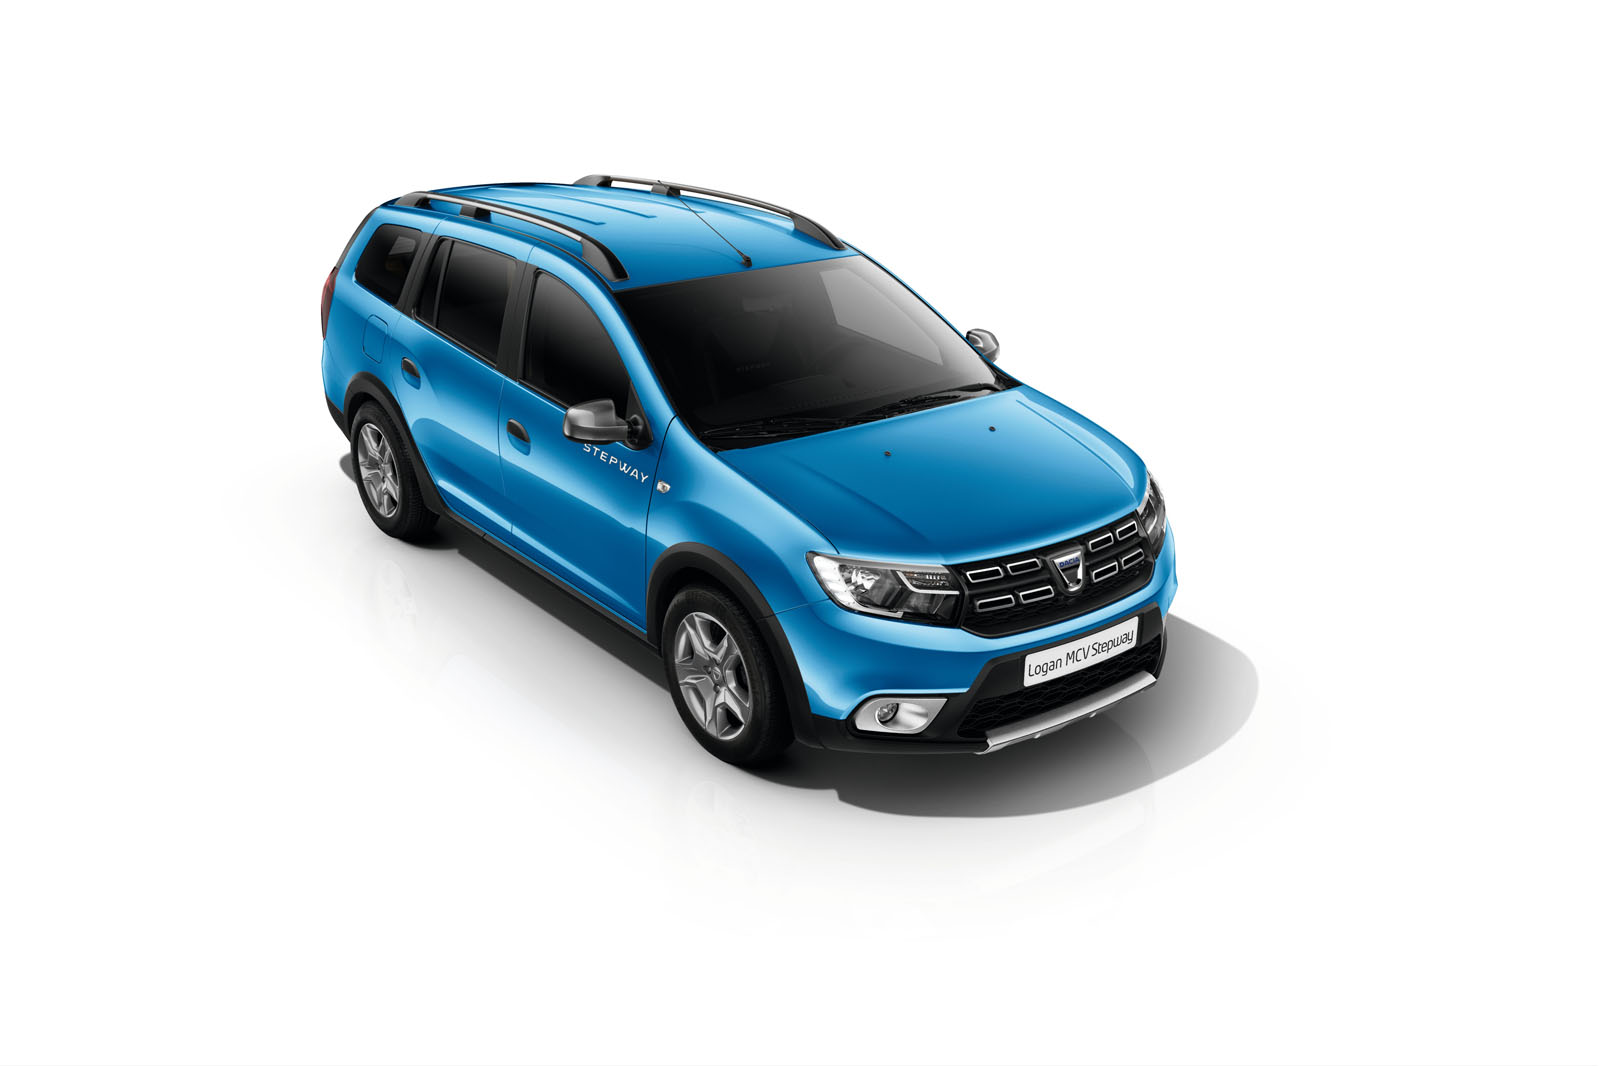 New Dacia Logan MCV Stepway on sale now priced from £11,495